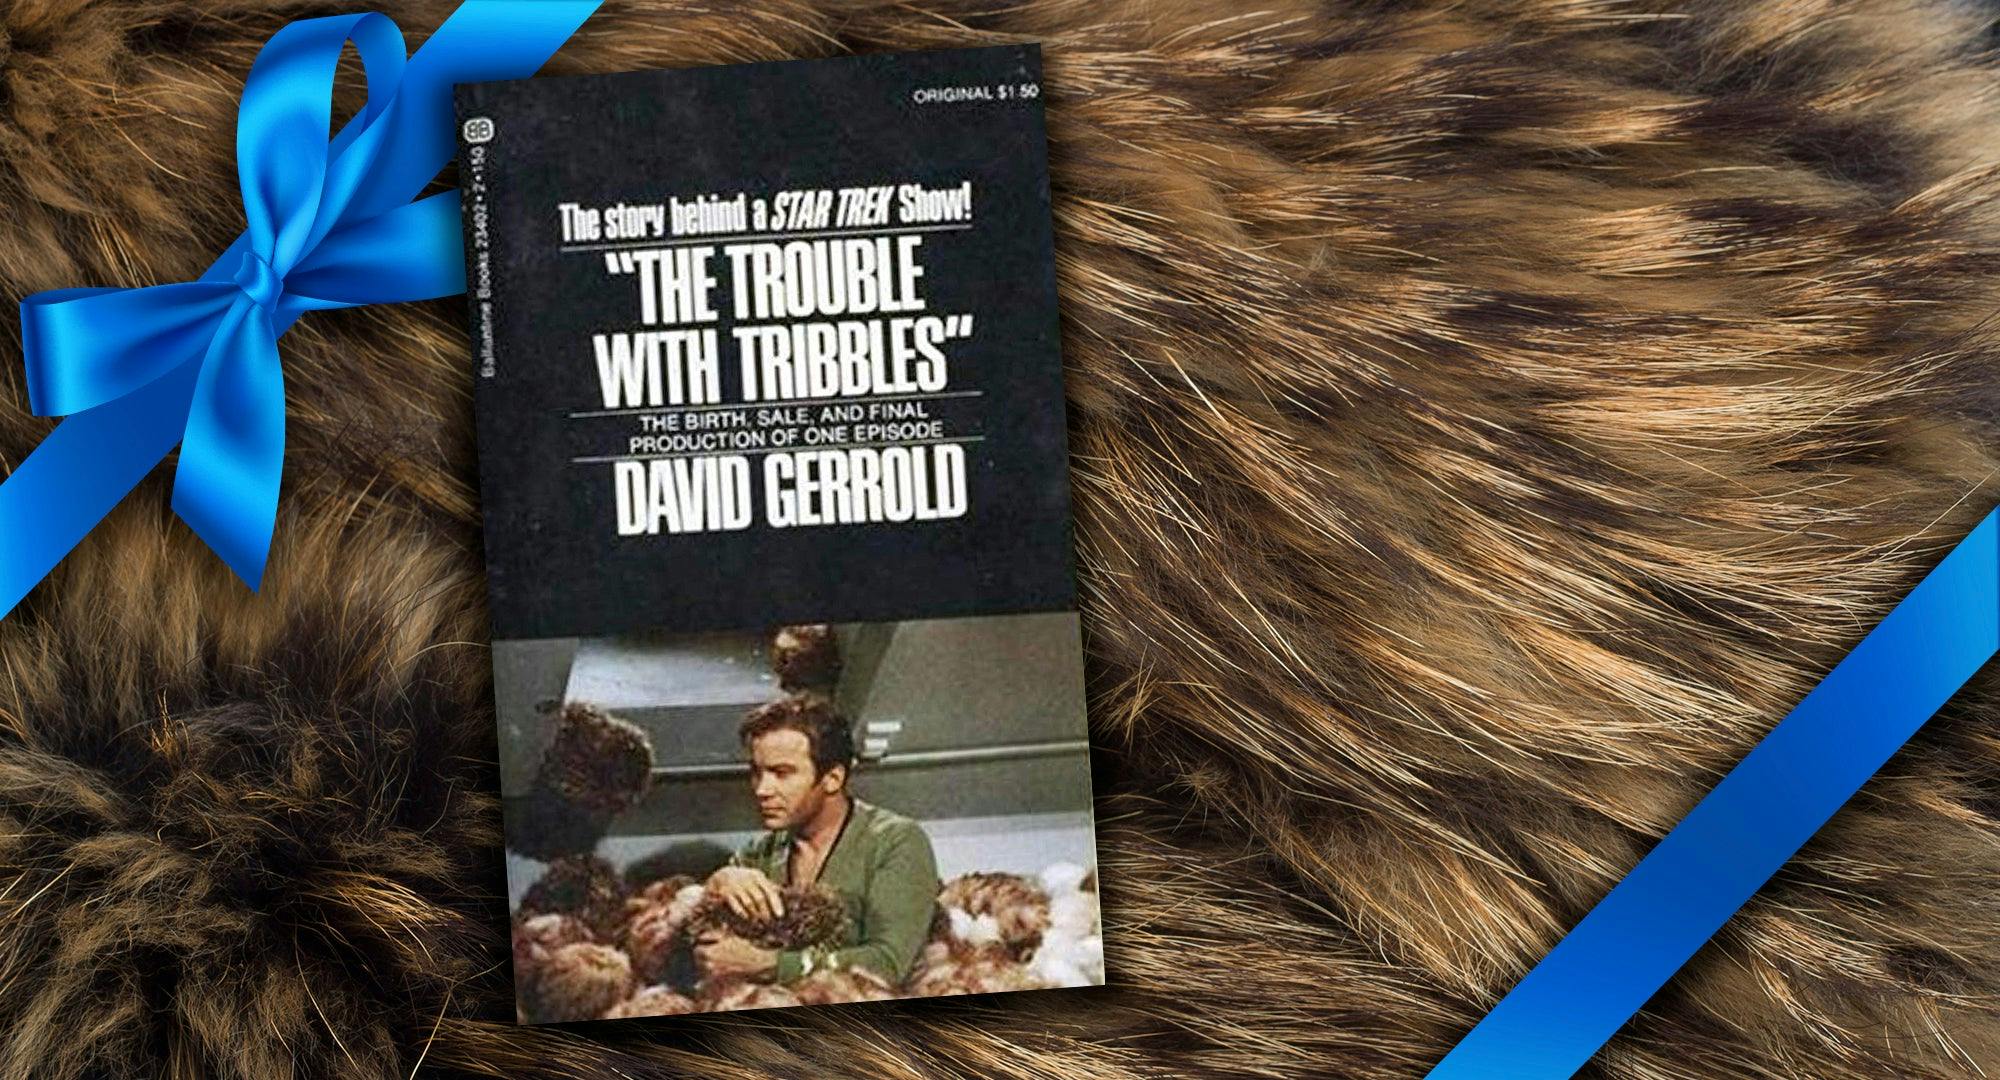 Star Trek: The Original Series - "The Trouble With Tribbles"